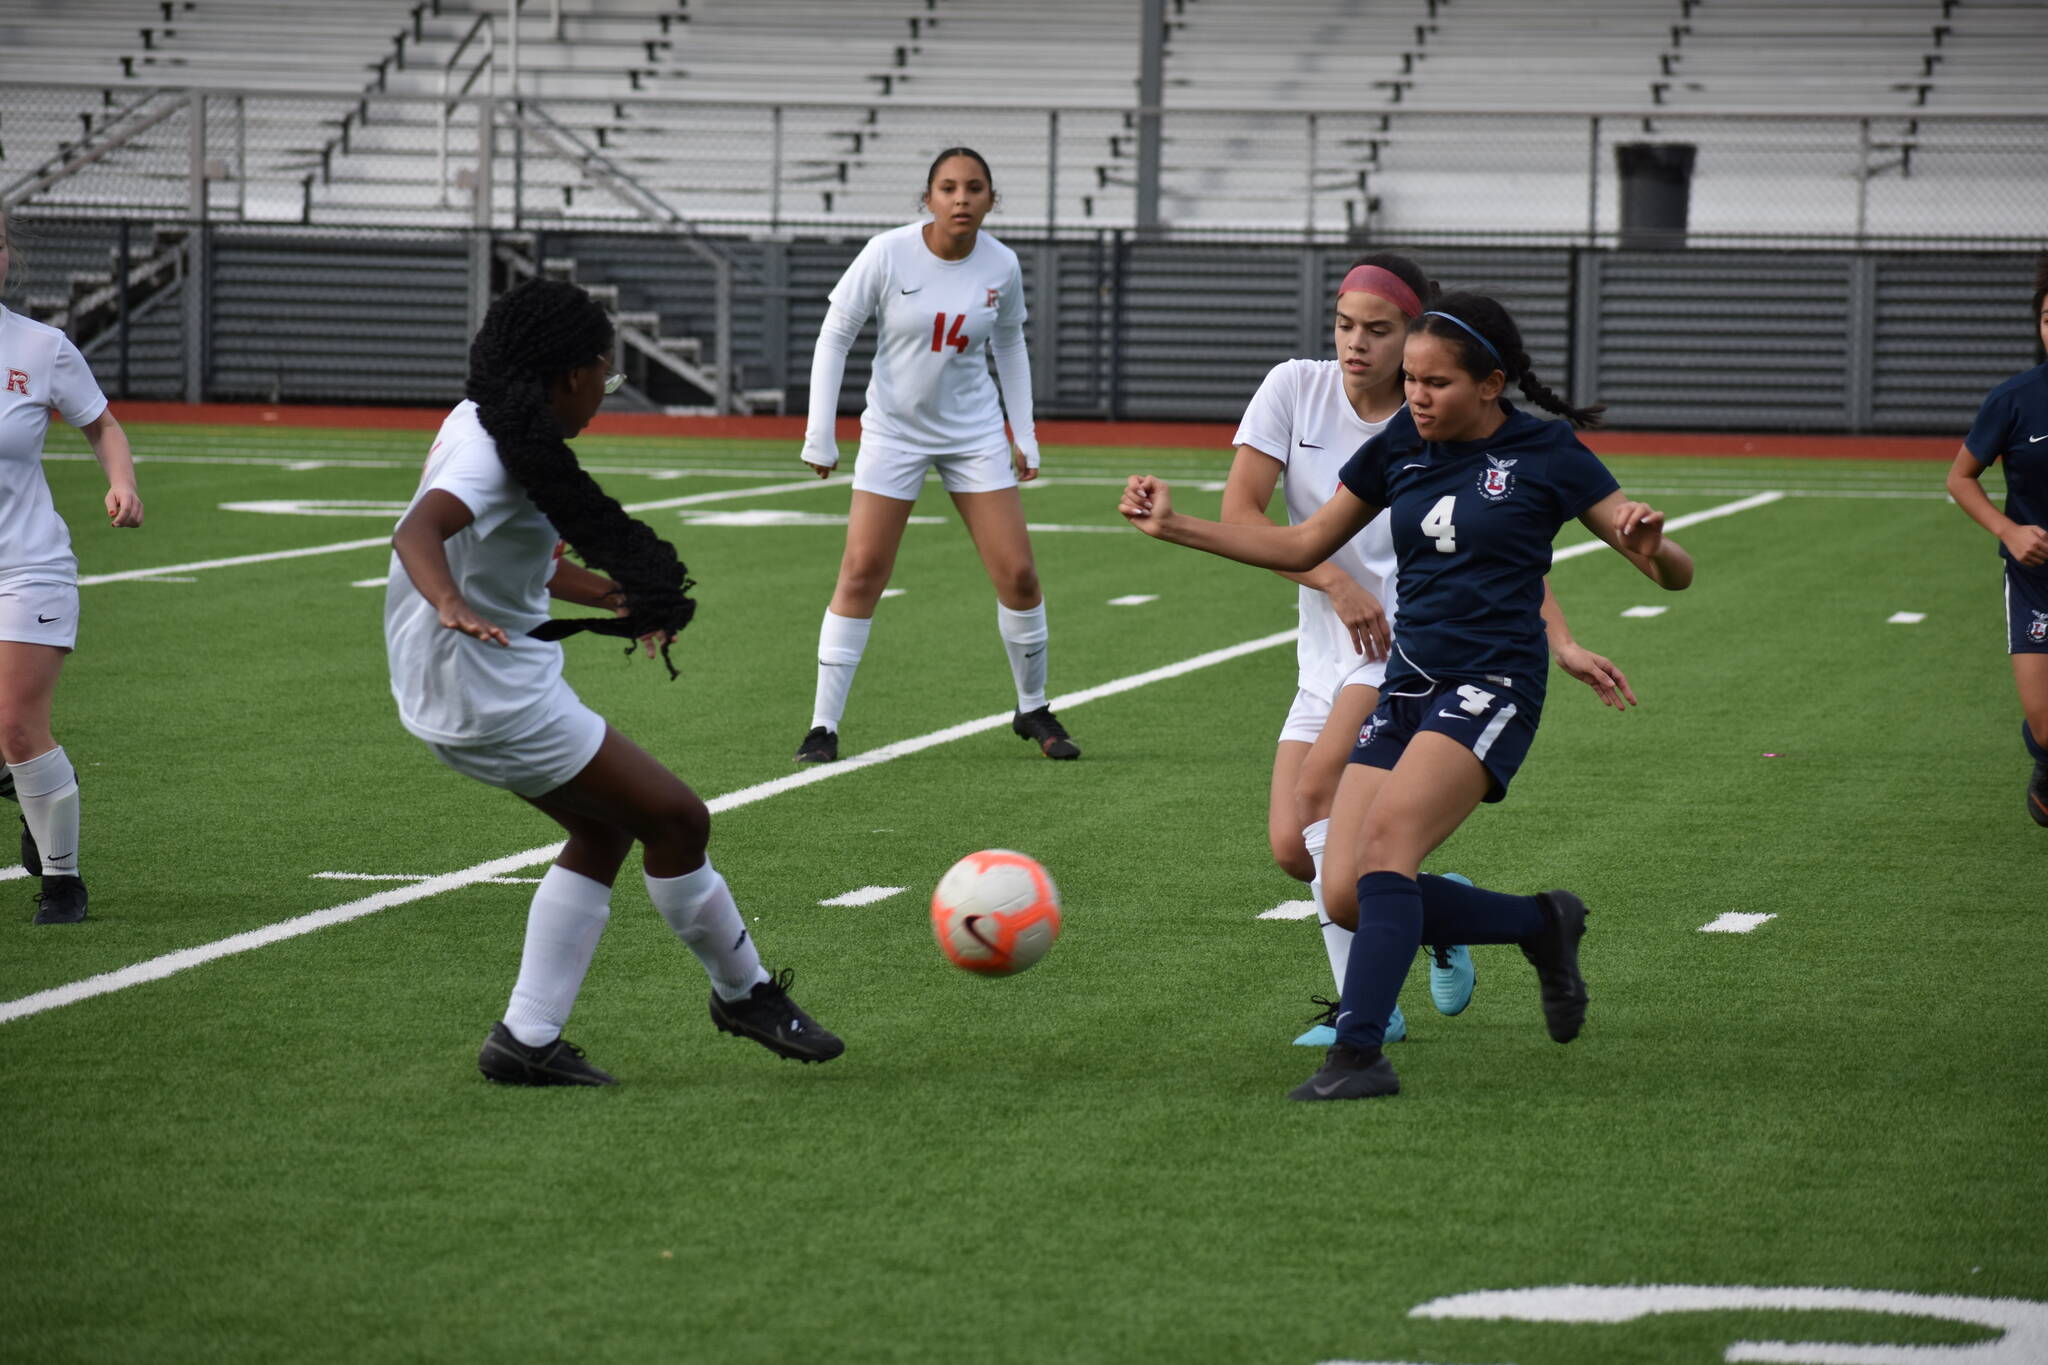 Sophomore Emily Staley challenging the Renton attack. Photo by Ben Ray/Renton Reporter